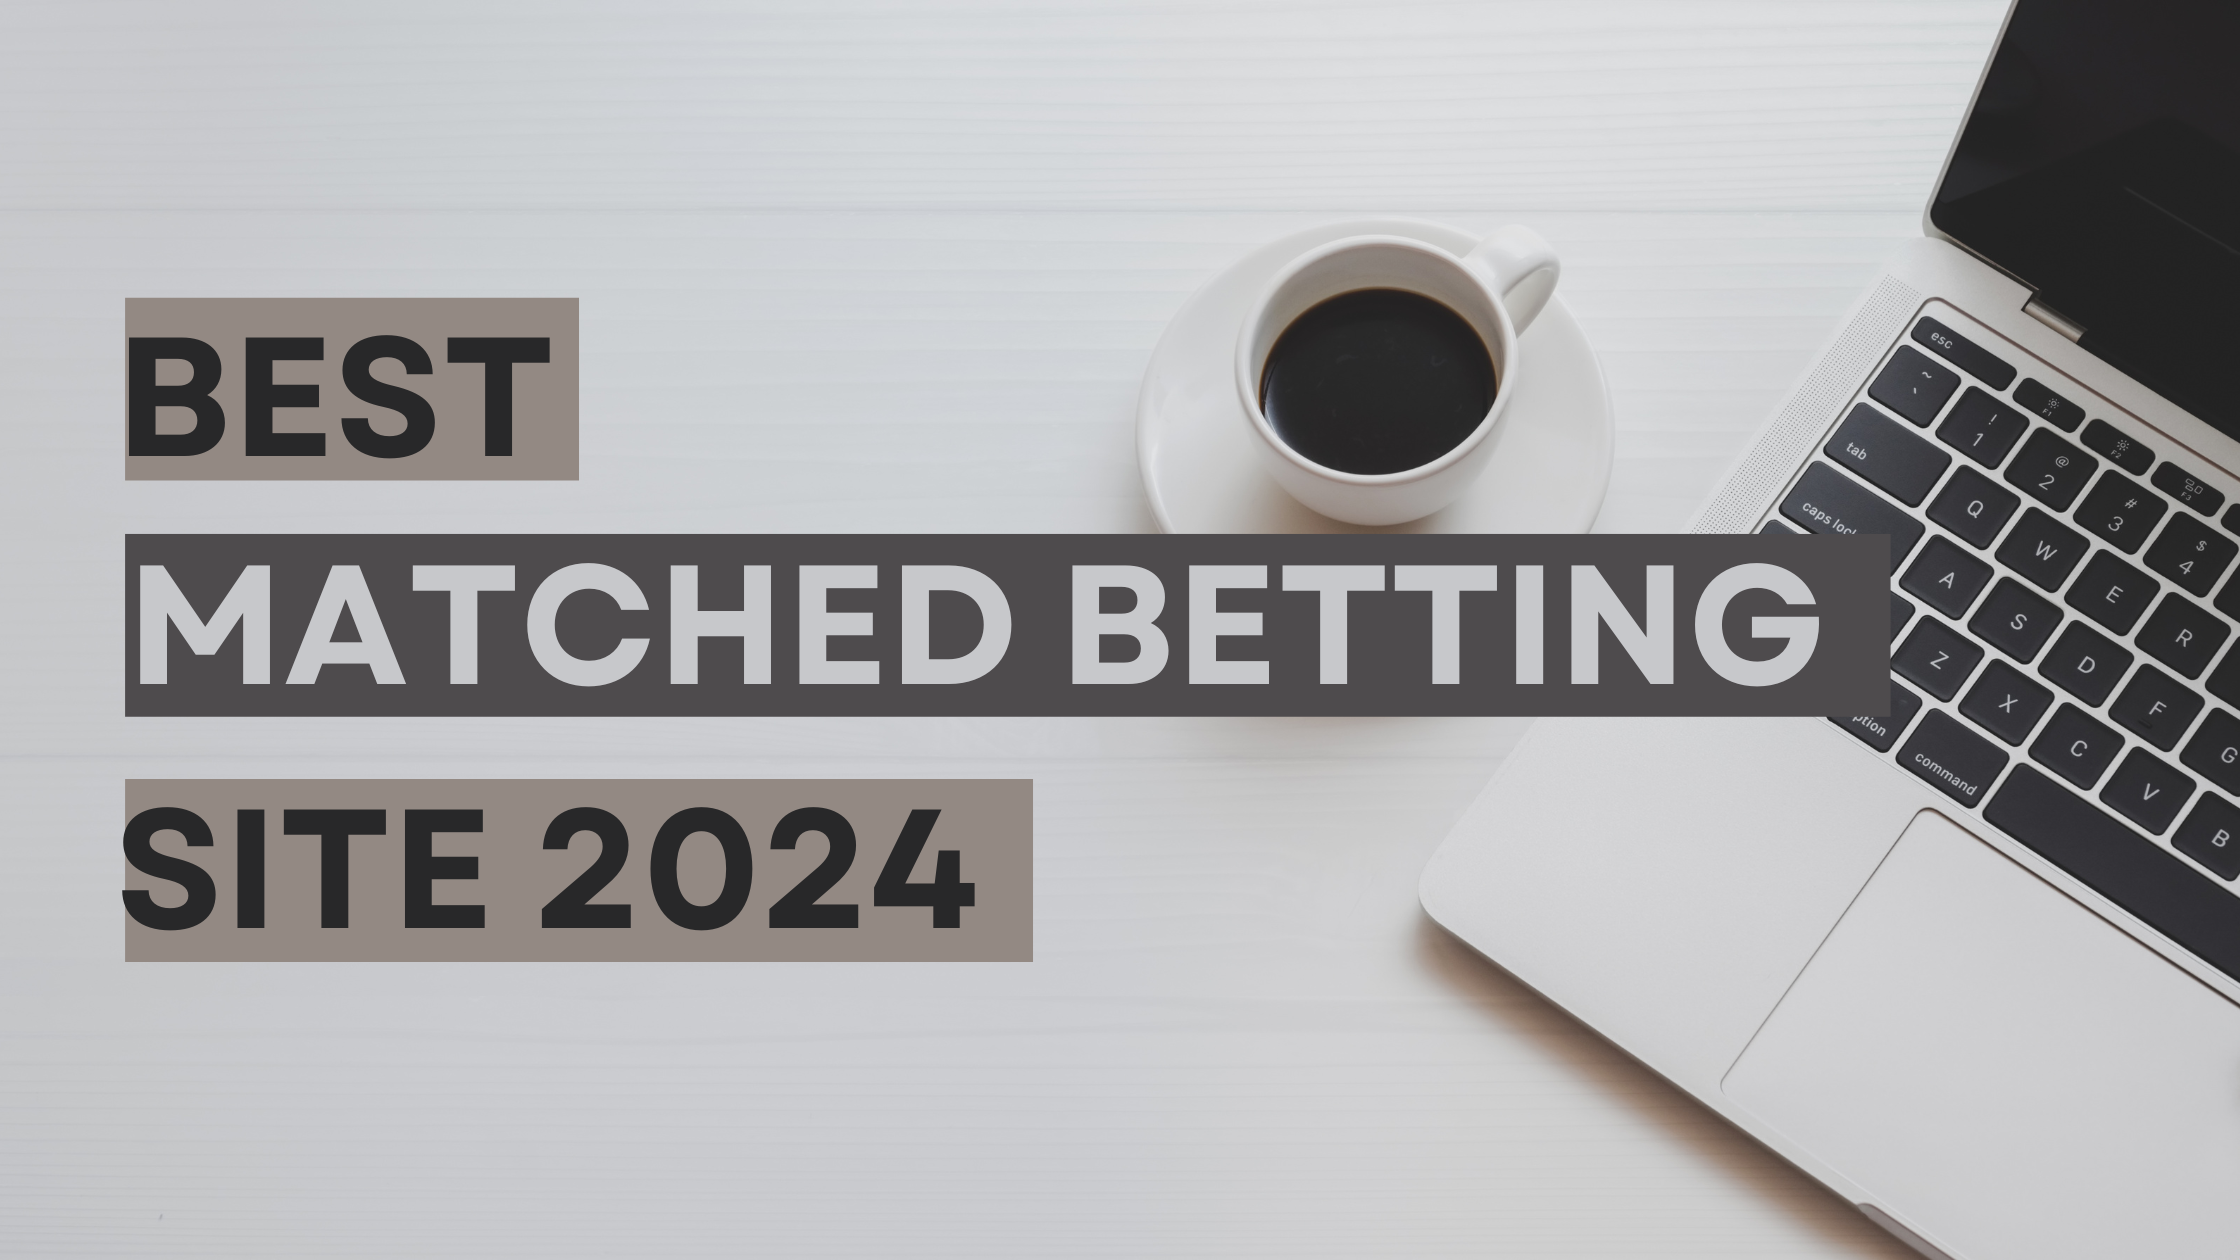 Best Matched Betting Site